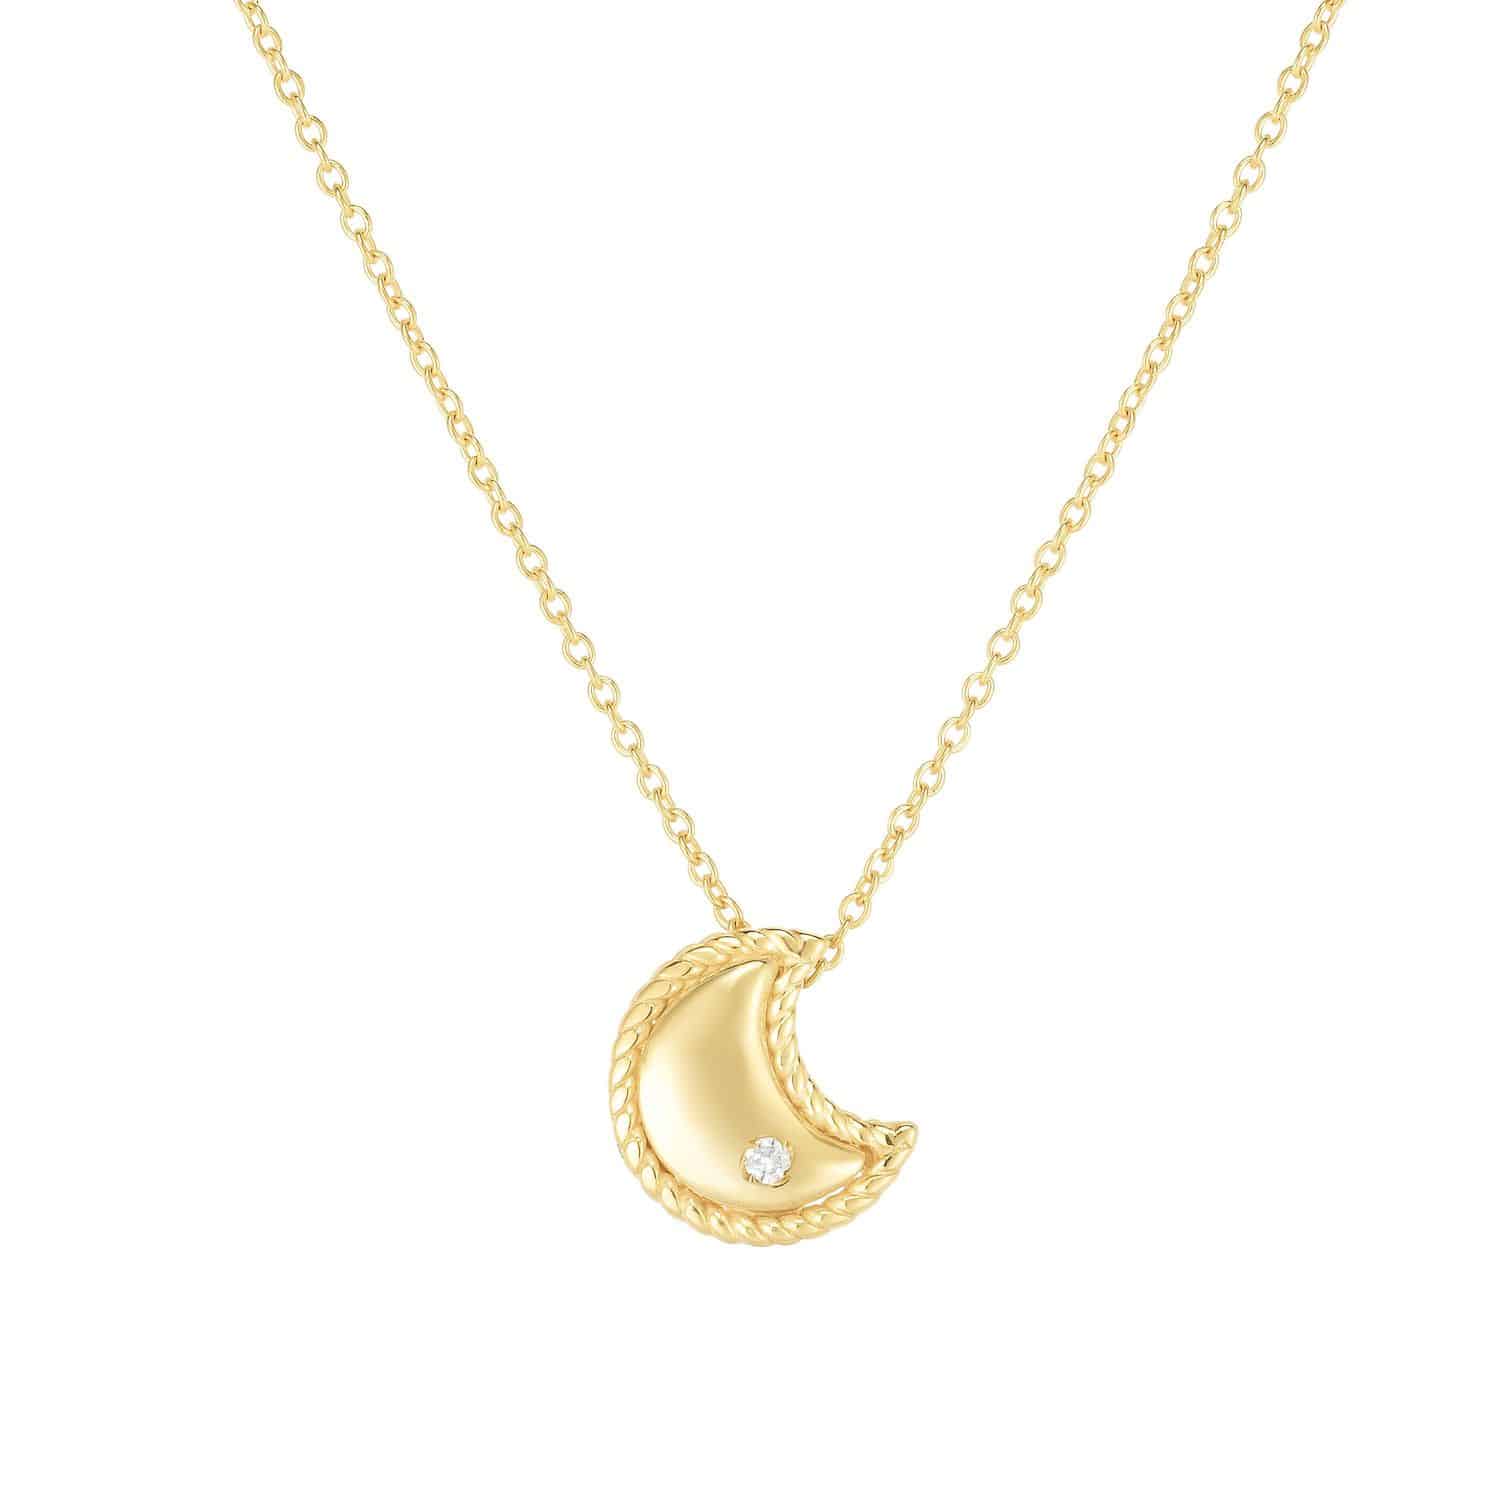 Natural Diamond 14K Yellow Gold Twisted Rope Moon Pendant Necklace 18" Adjust.